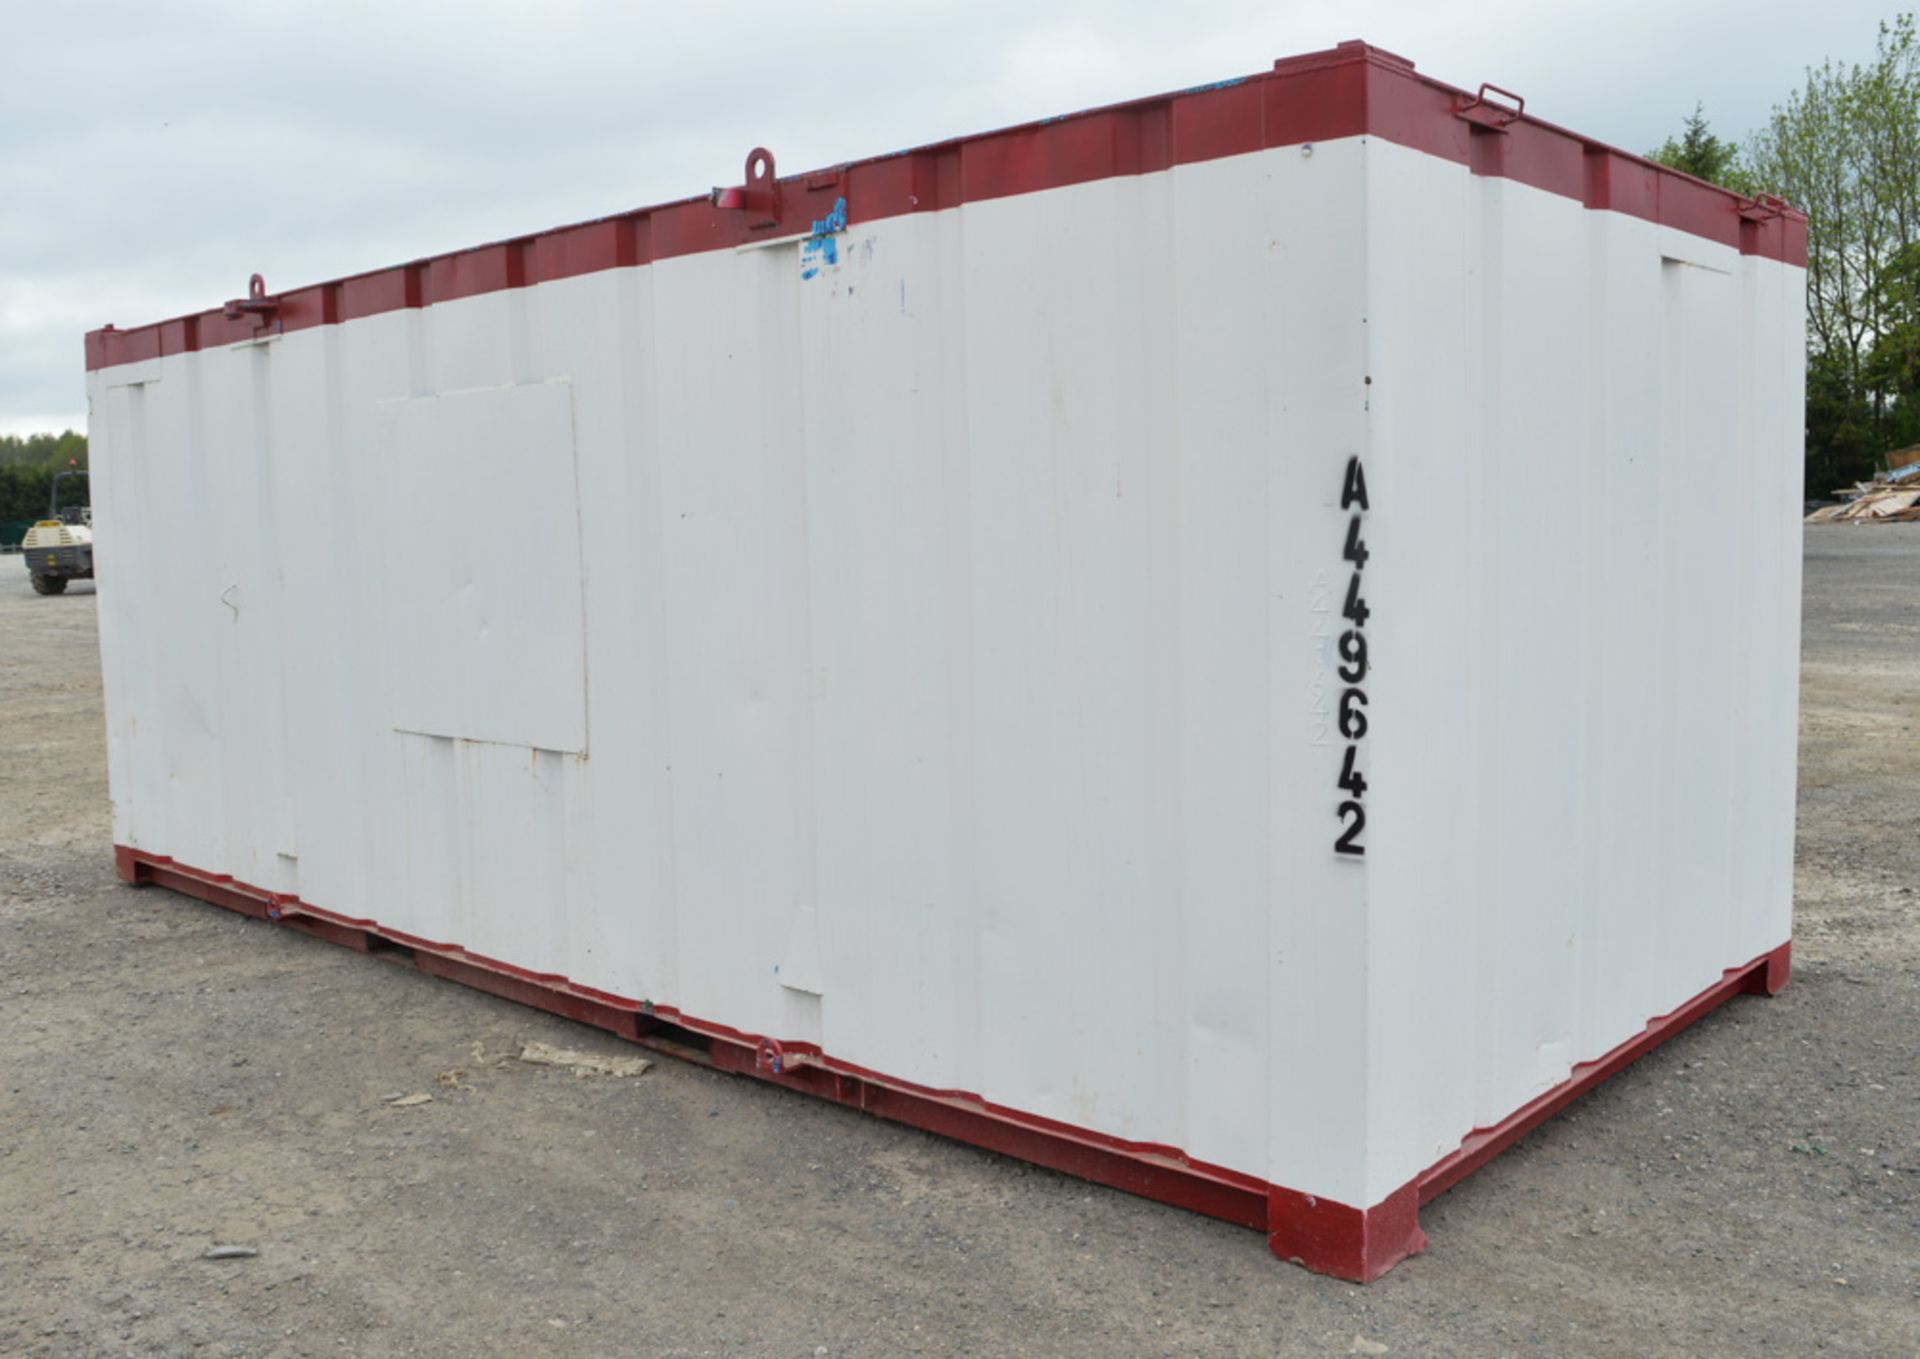 24 ft x 9 ft steel anti vandal site store unit A449642 - Image 2 of 3